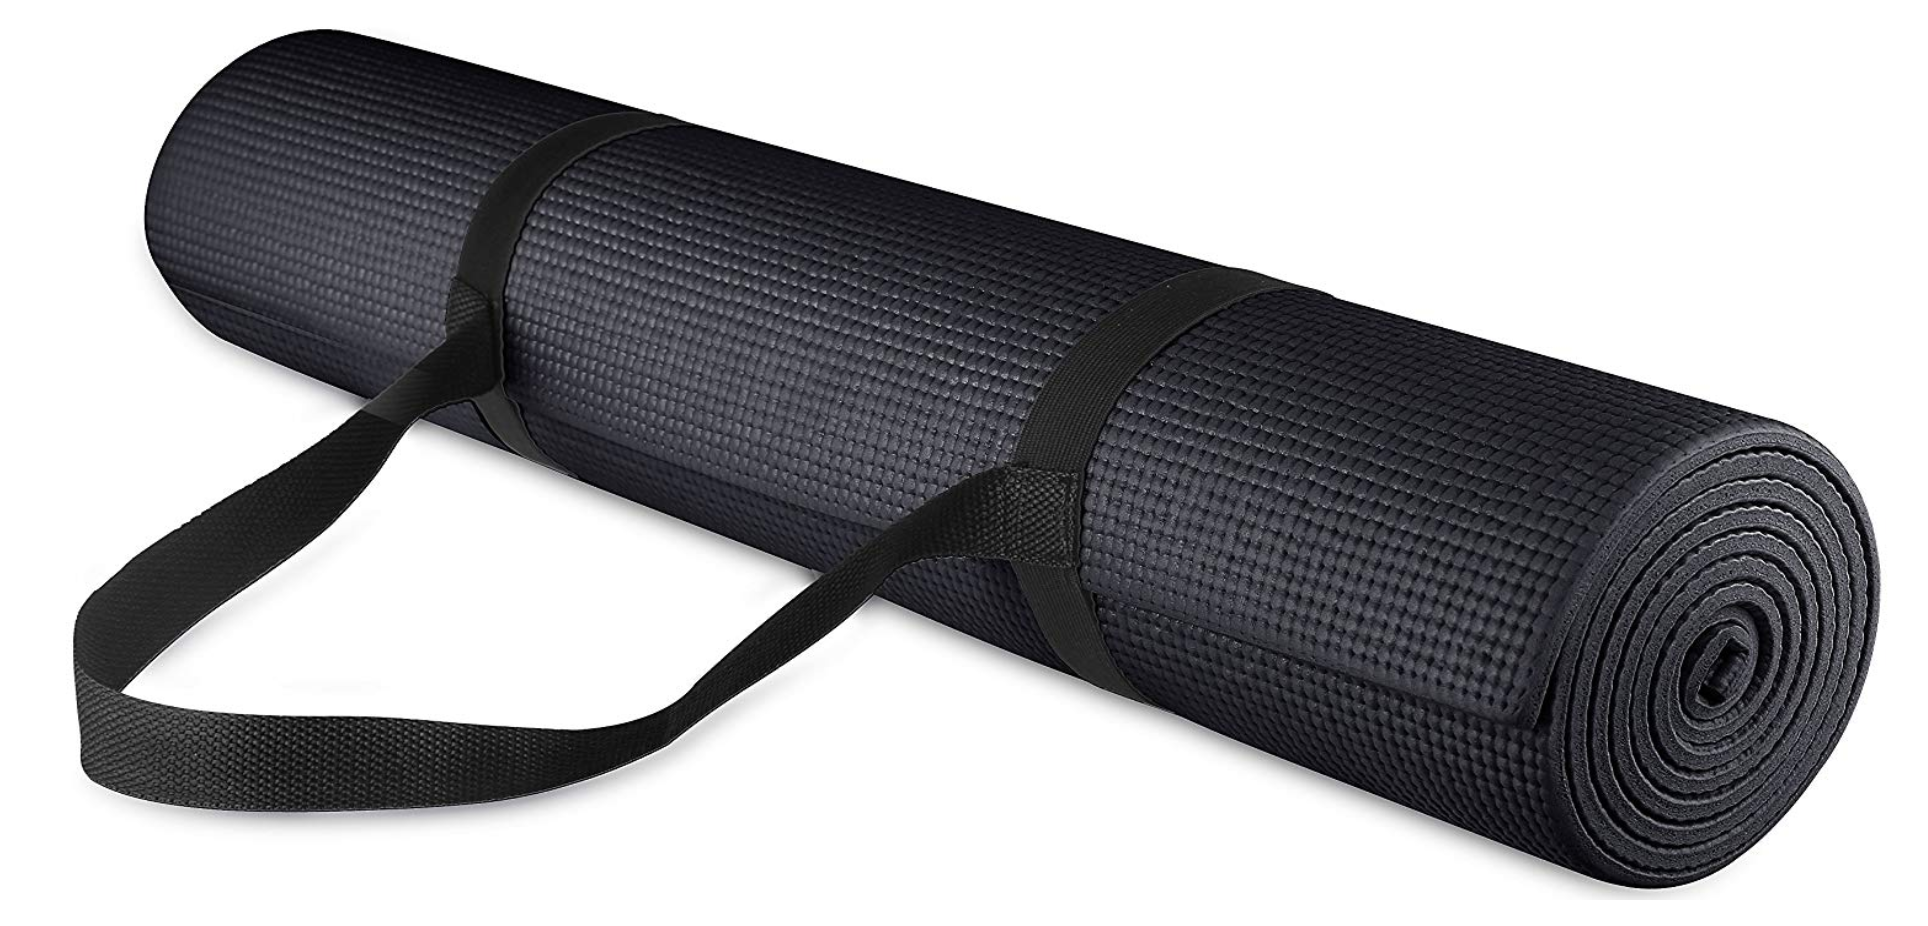 A yoga mat is perfect for stretching or for doing floor exercises (Amazon)